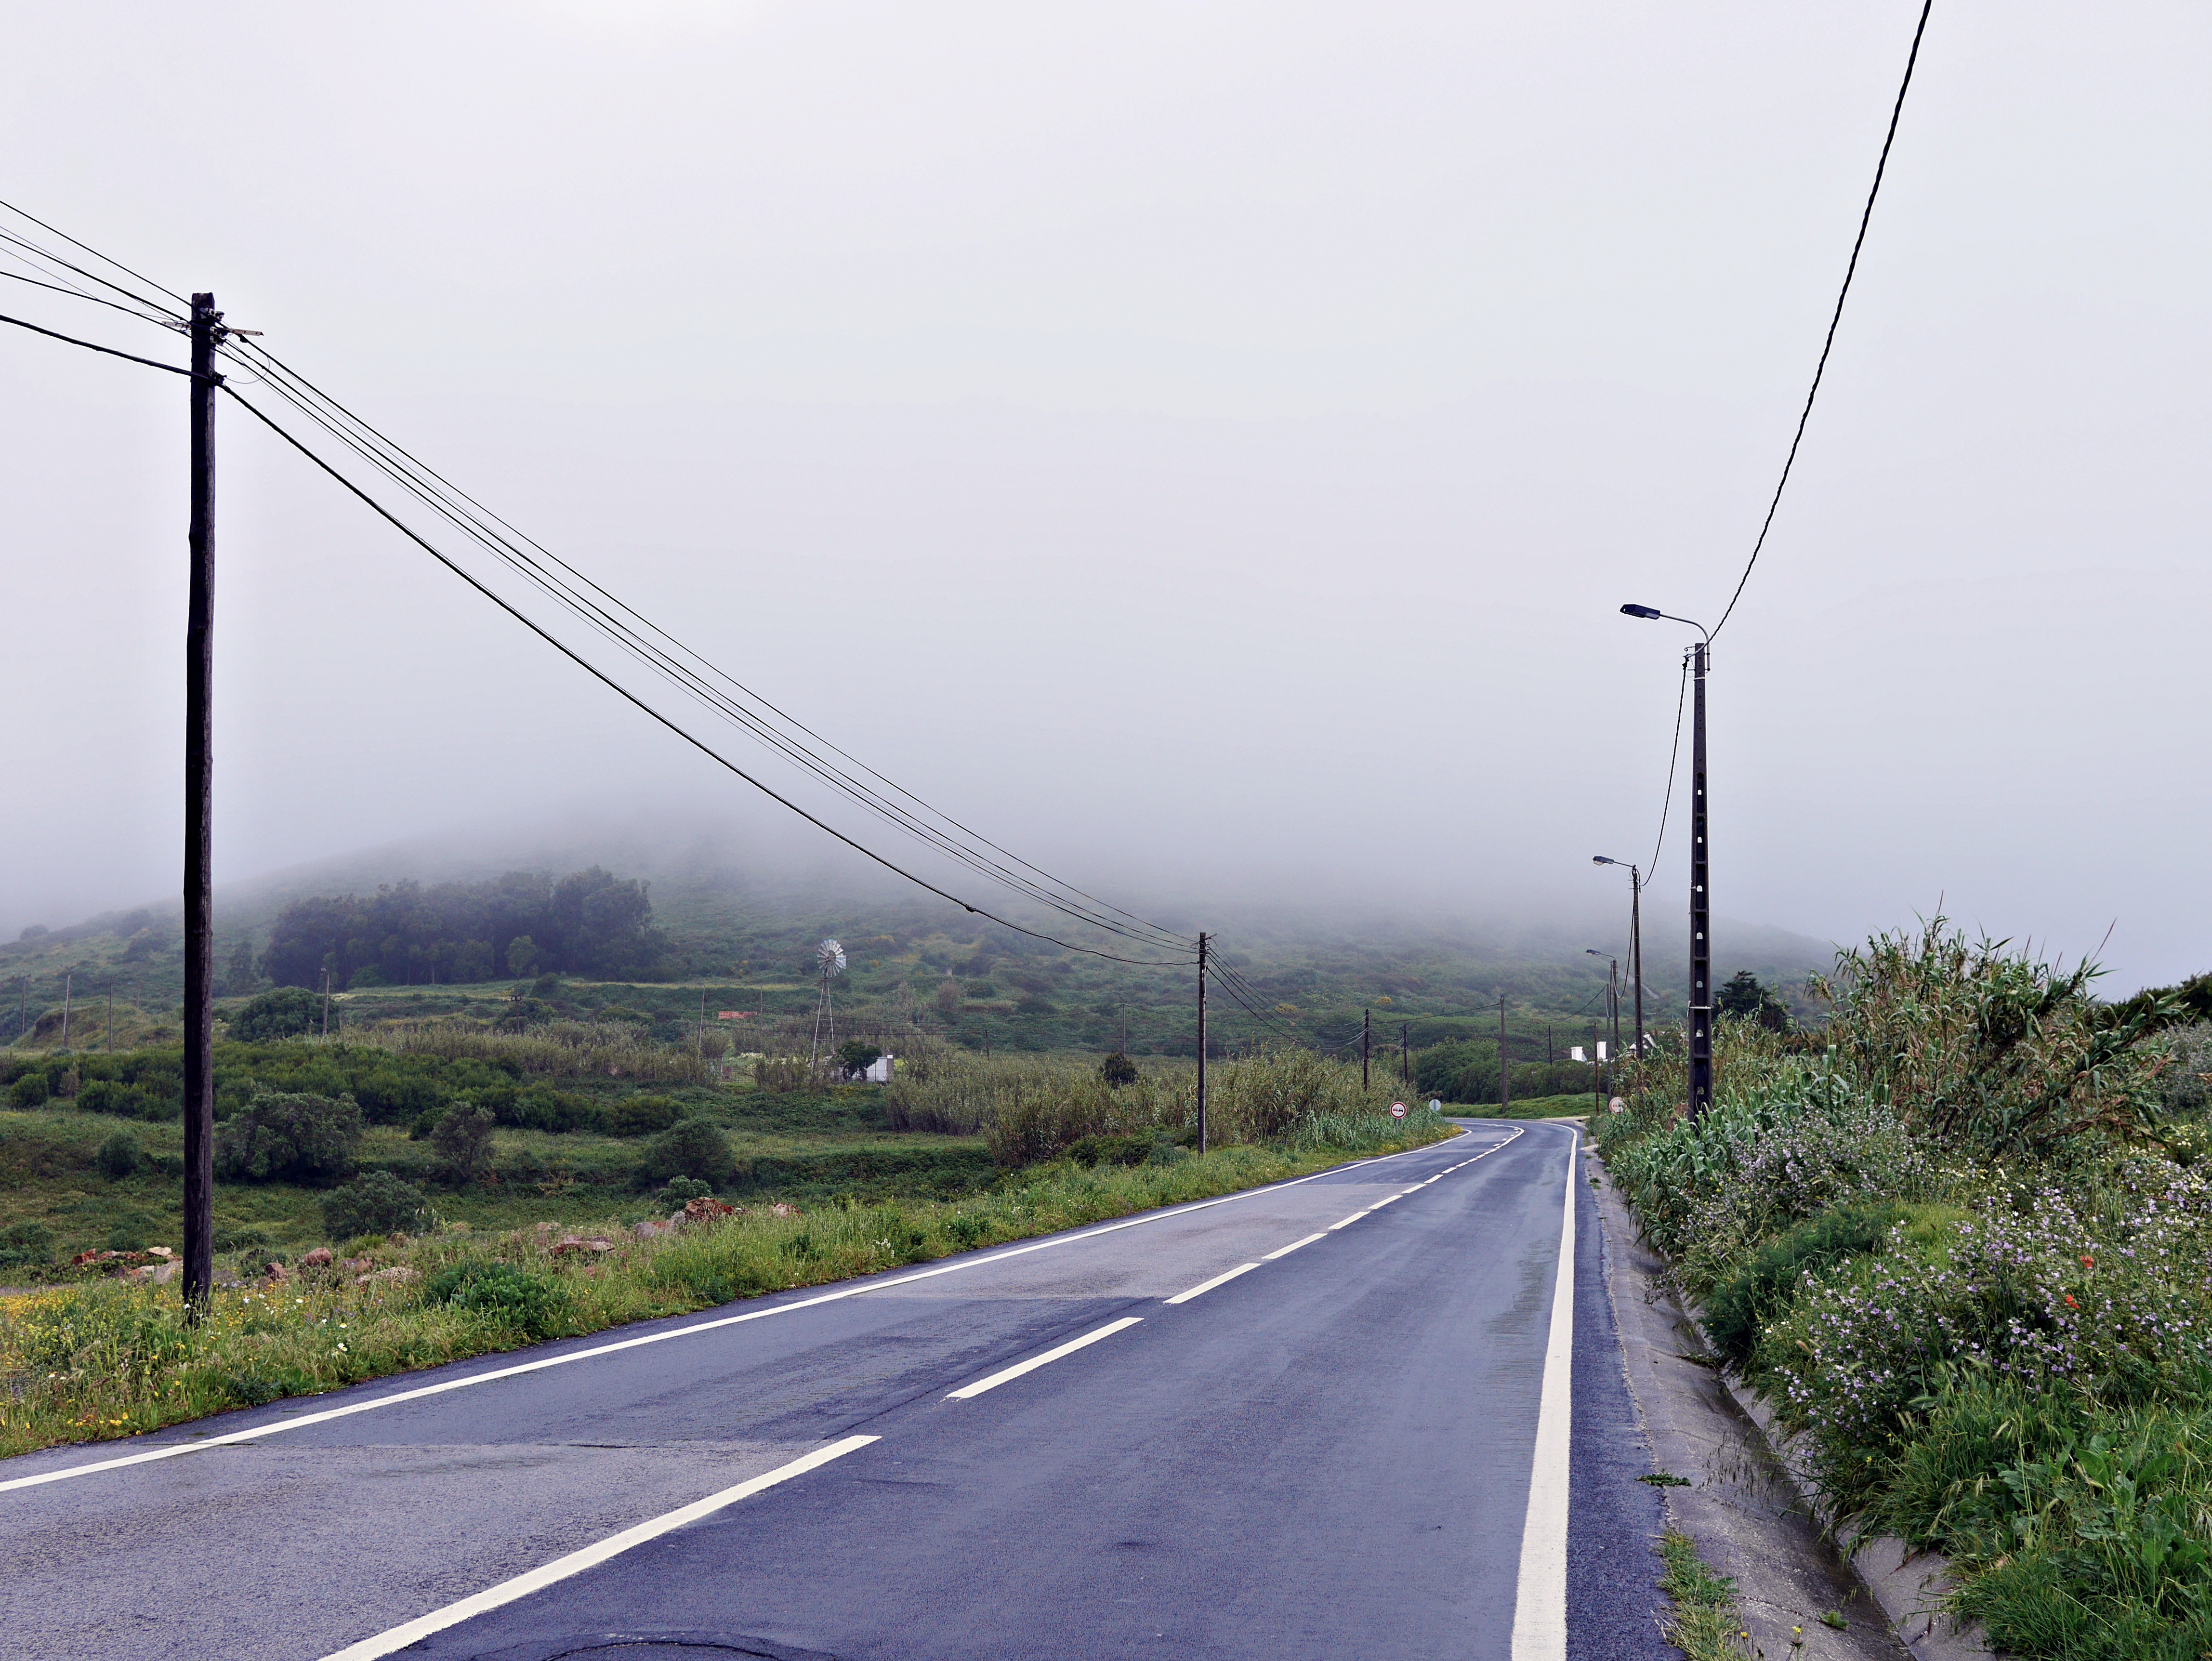 A colour photograph of en empty road on a rainy and foggy day. The top half of the image is engulfed in clouds. Around the road is verdant green vegetation.